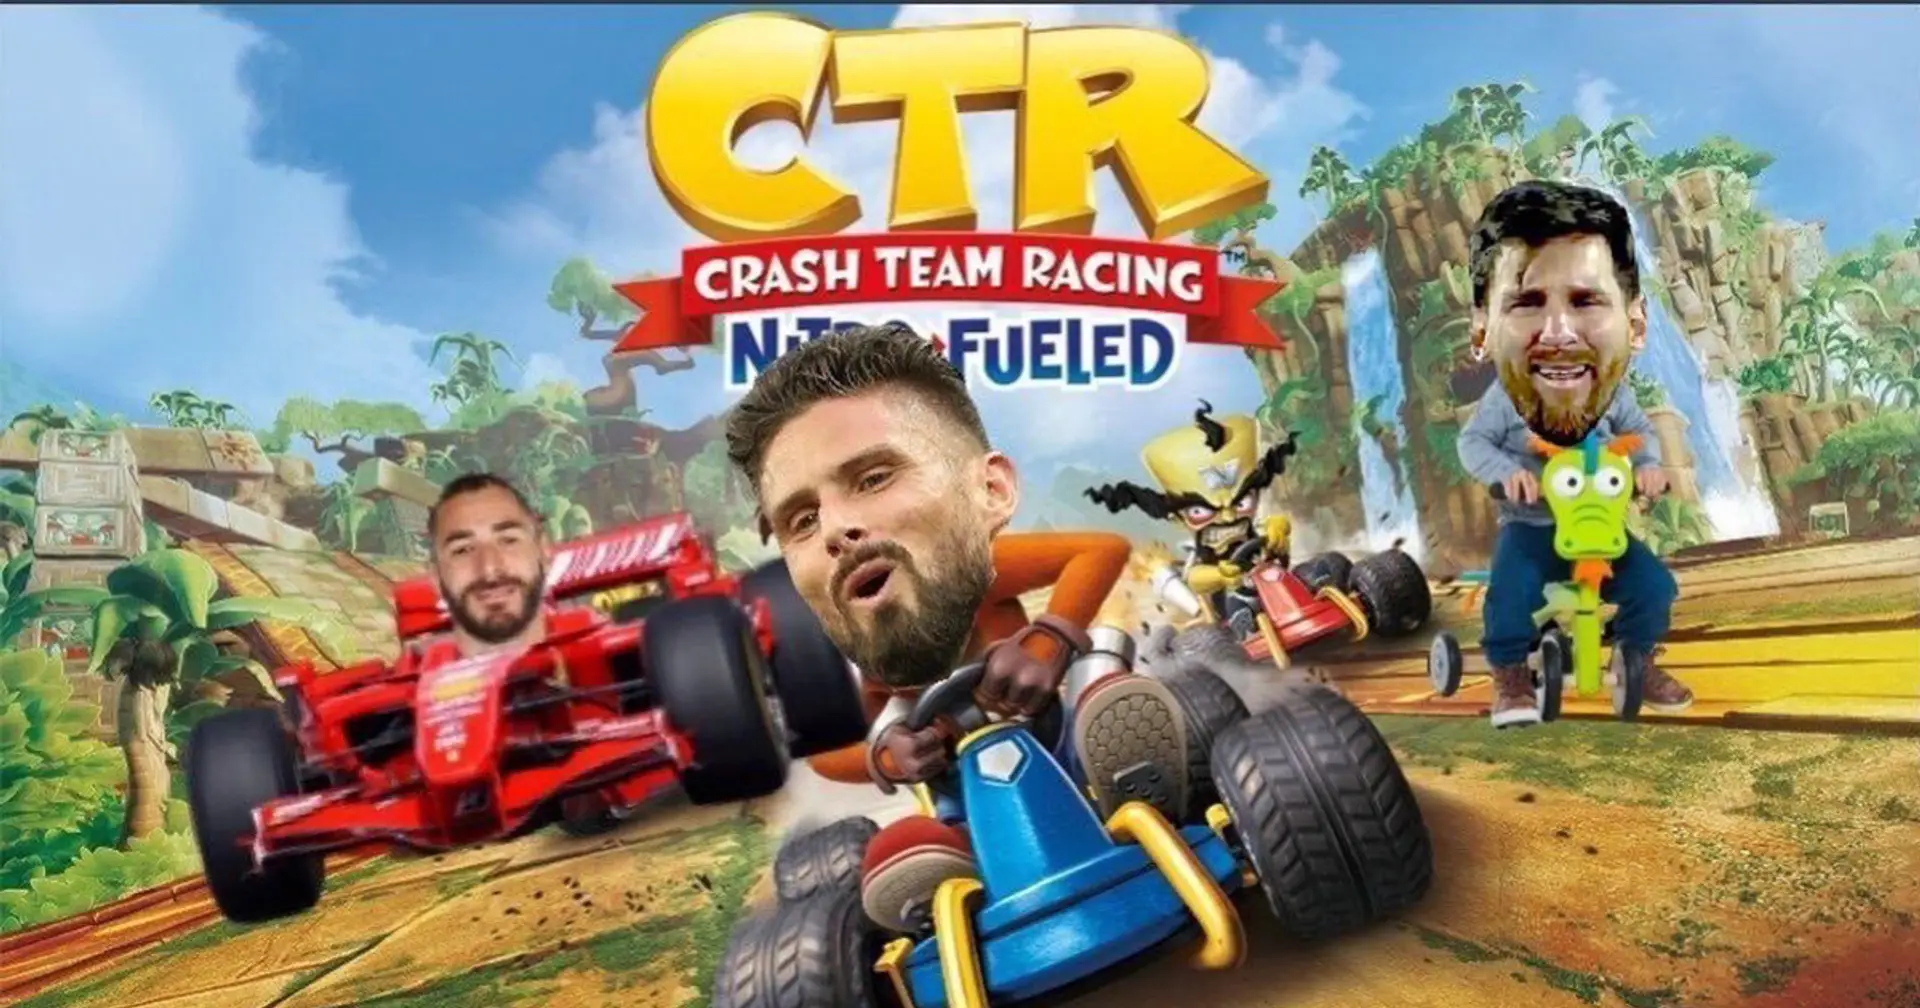 The only true Crash Team Racing game cover  😂🏎